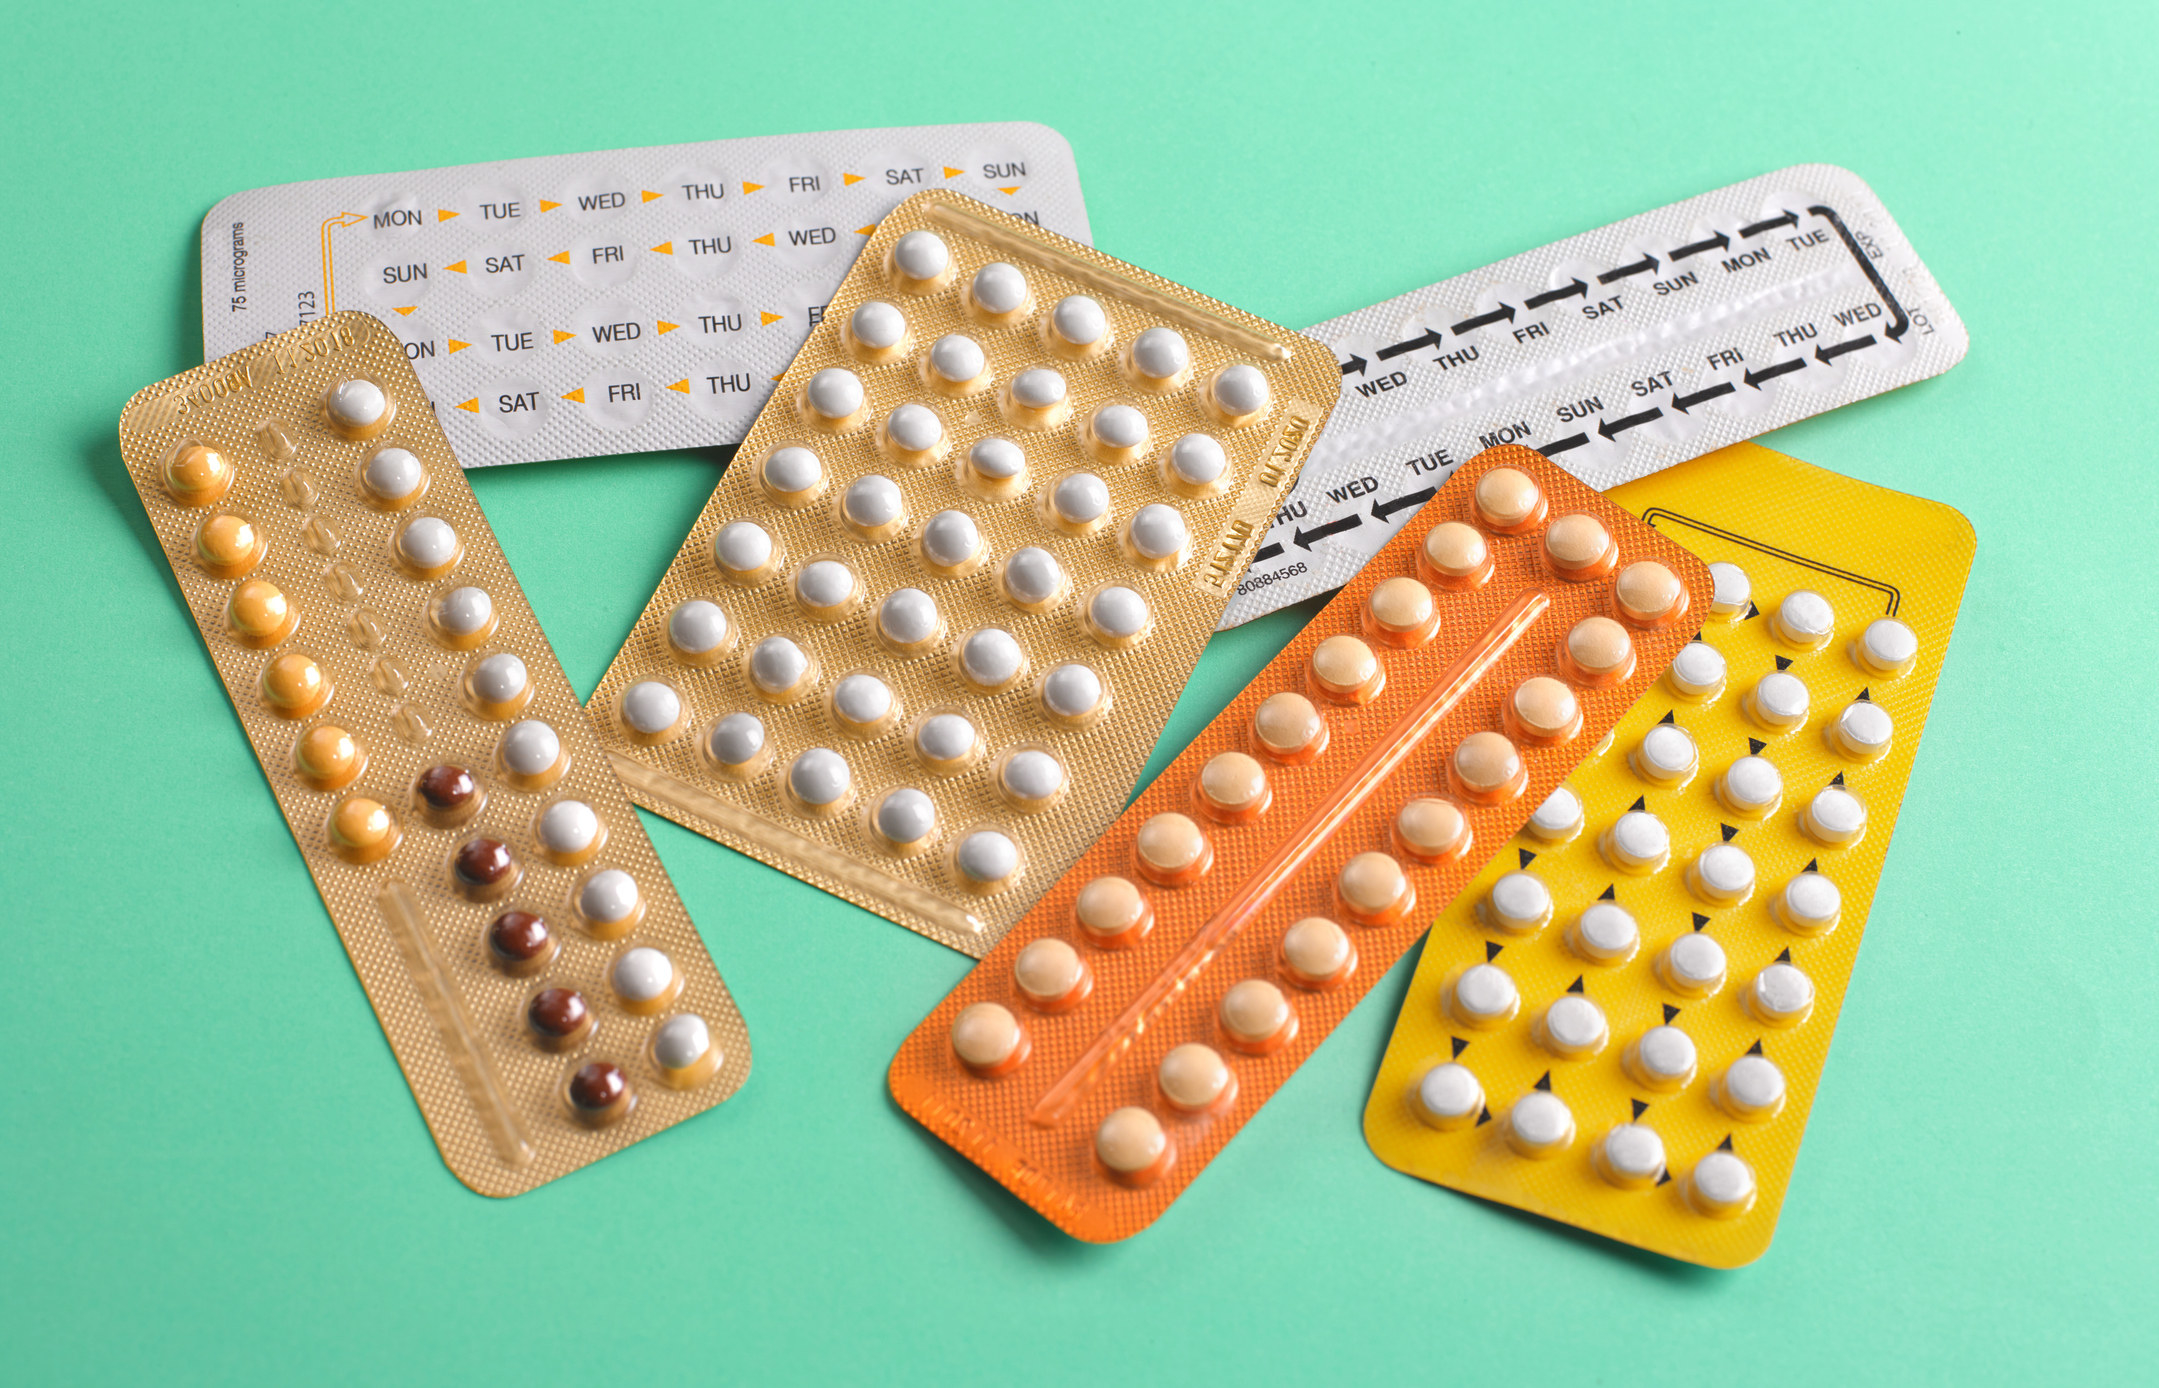 A stock image of birth control pill packs on a green background